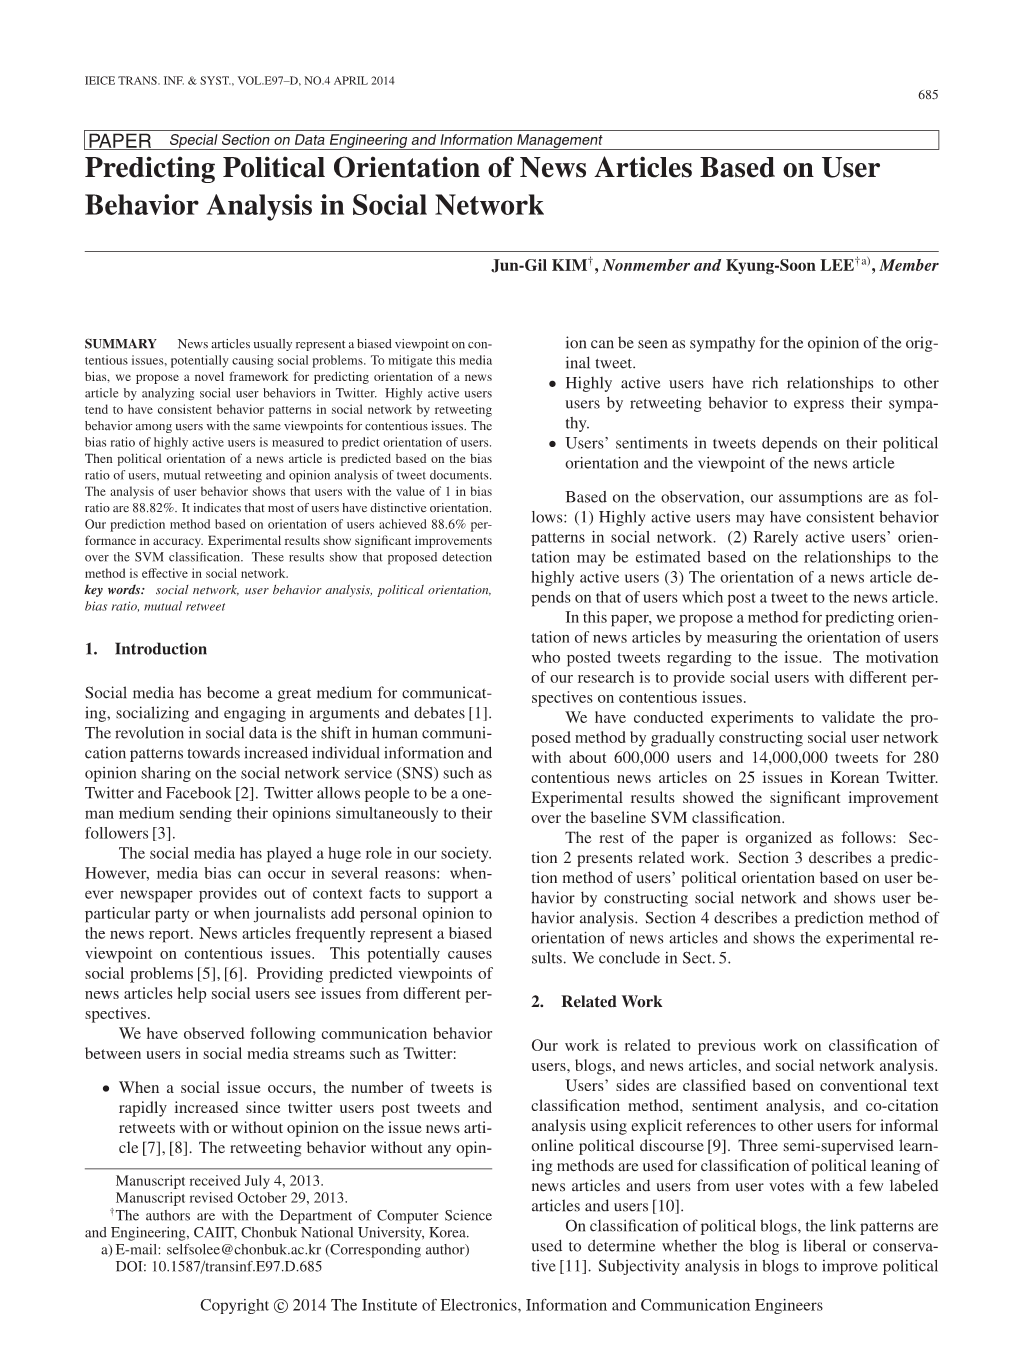 Predicting Political Orientation of News Articles Based on User Behavior Analysis in Social Network